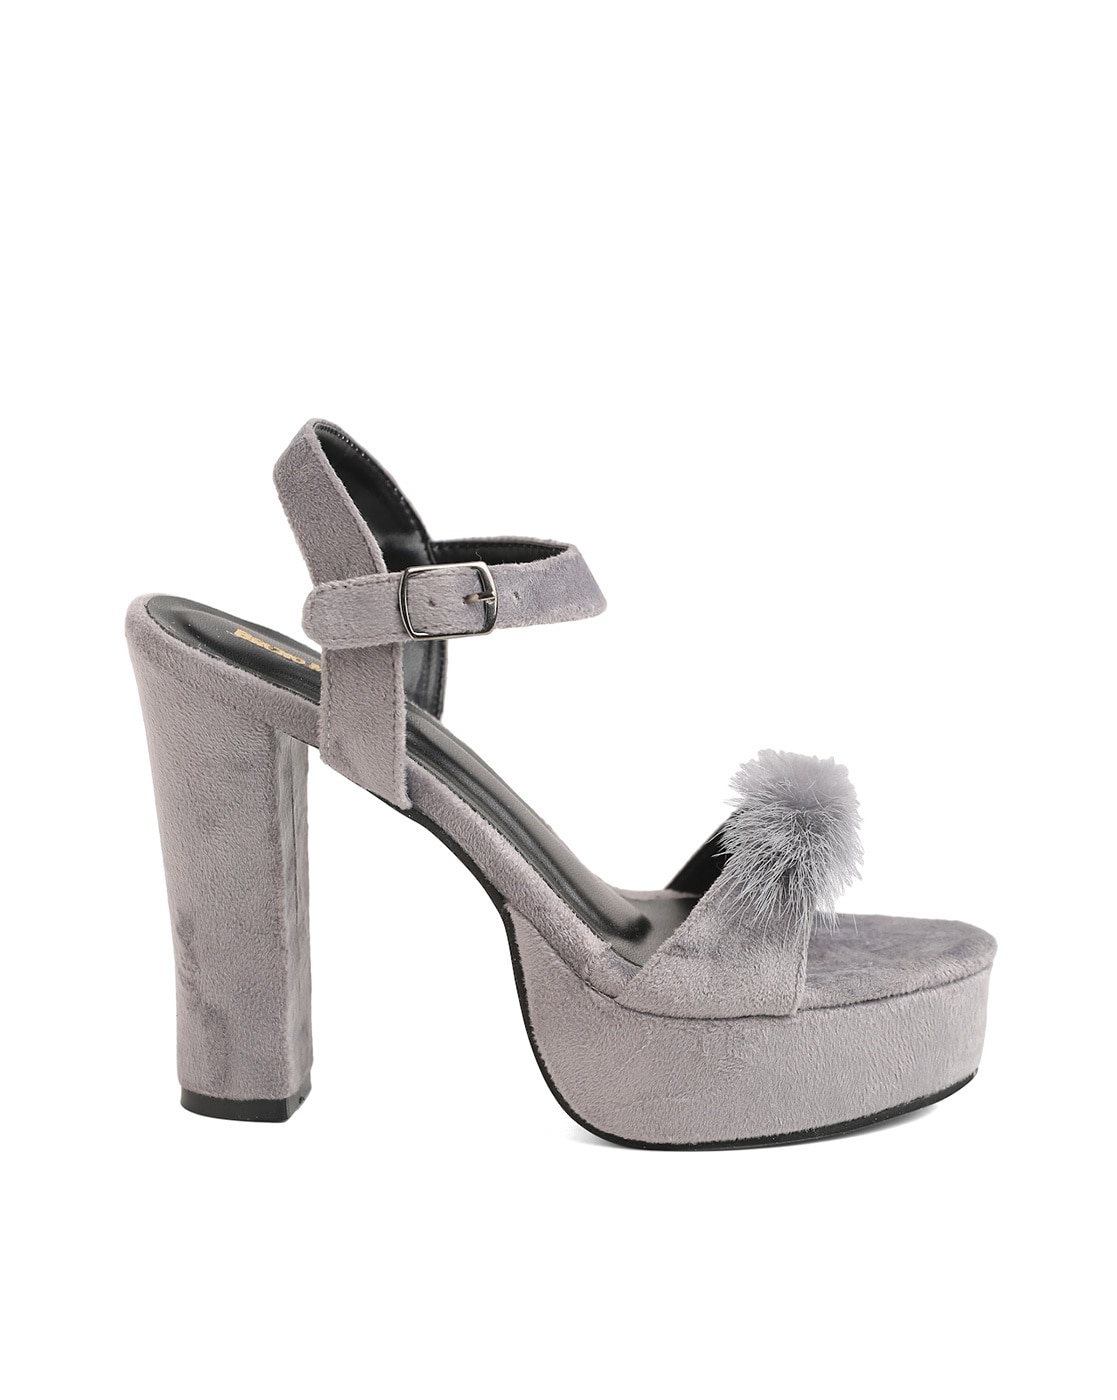 Grey fancy heels sandals at low price Off 60%, 70%, 75%. Offers